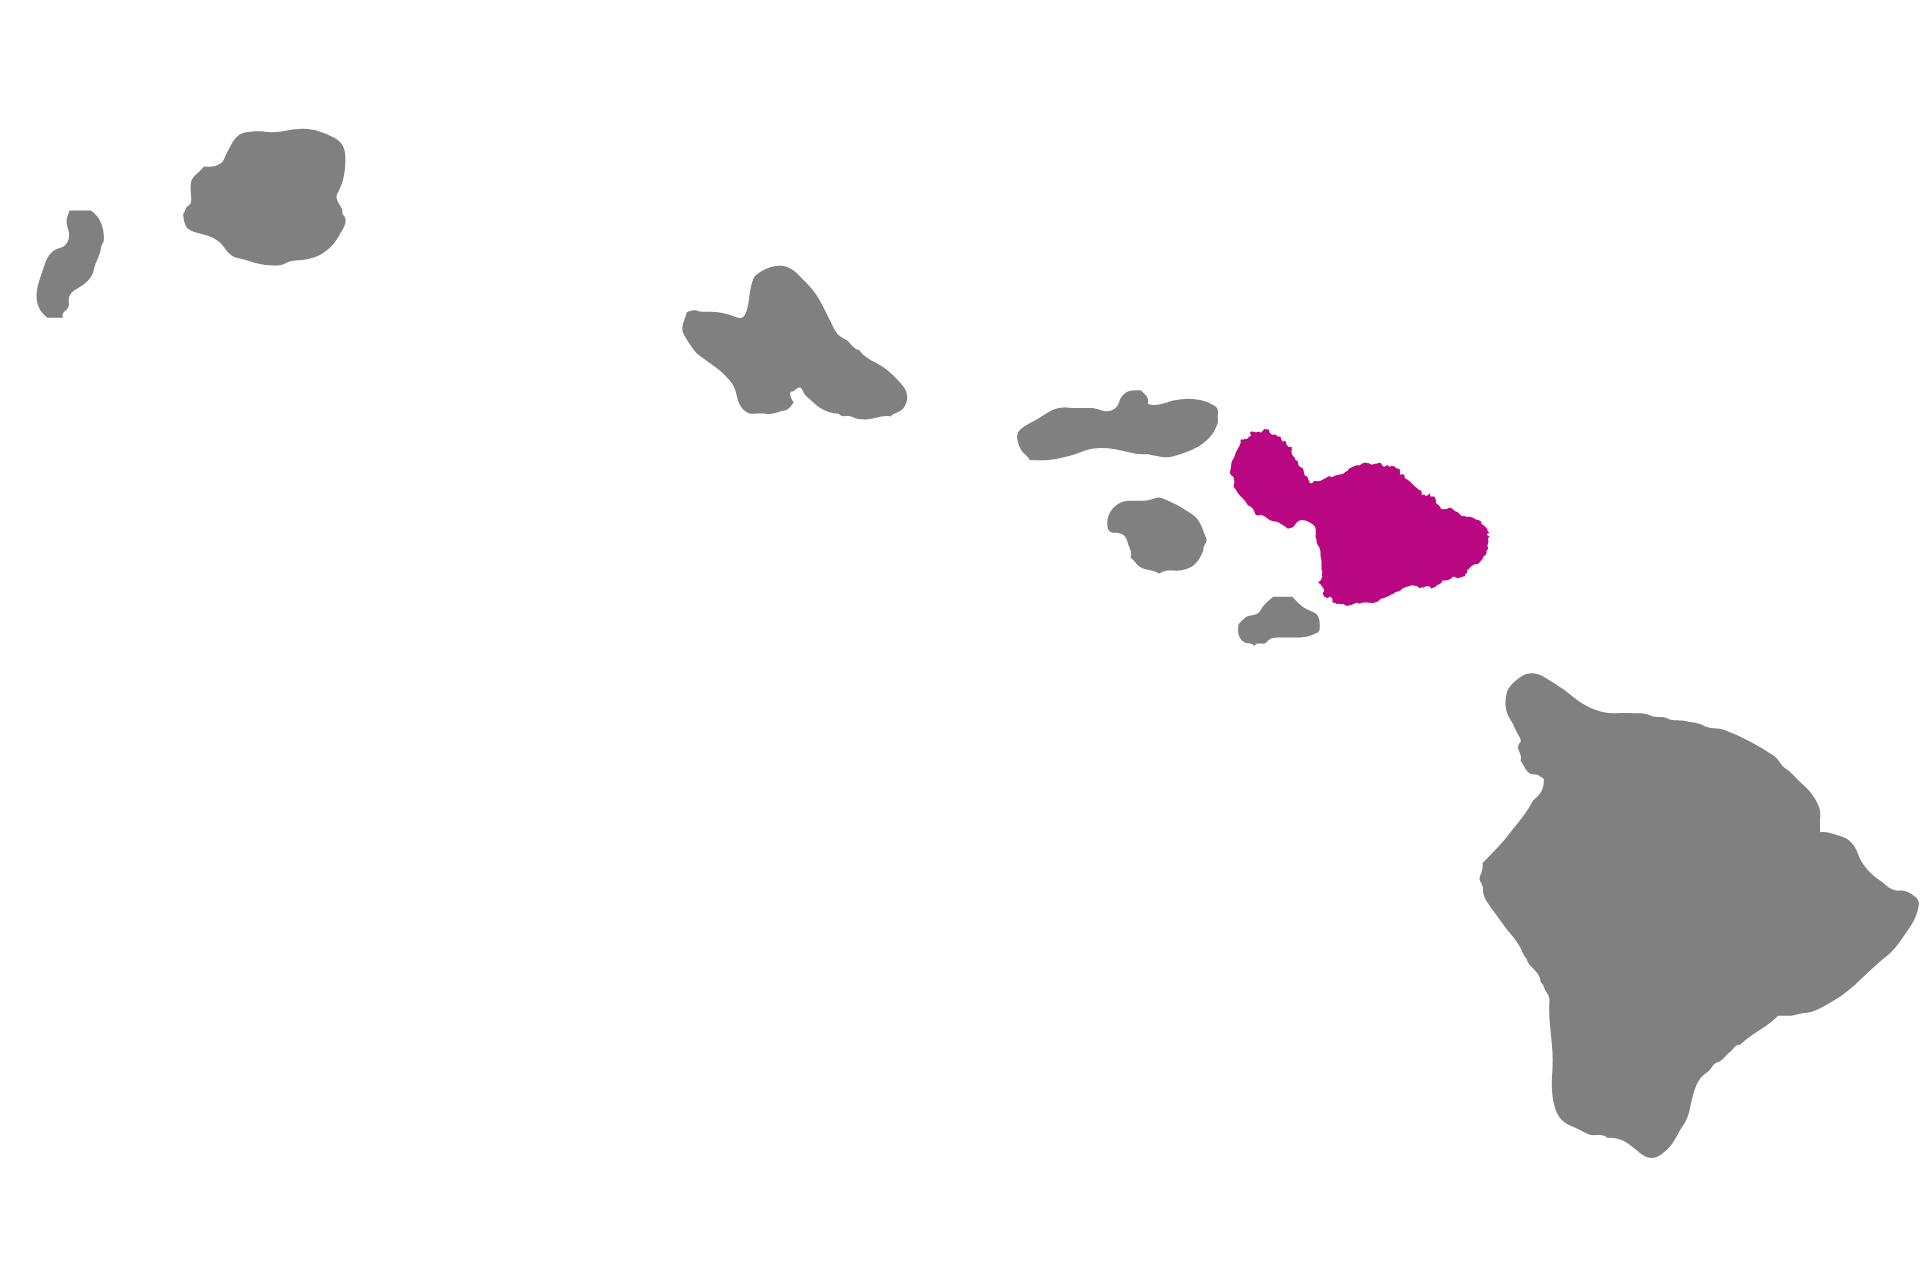 Map of Hawaiian Islands with Maui highlighted pink